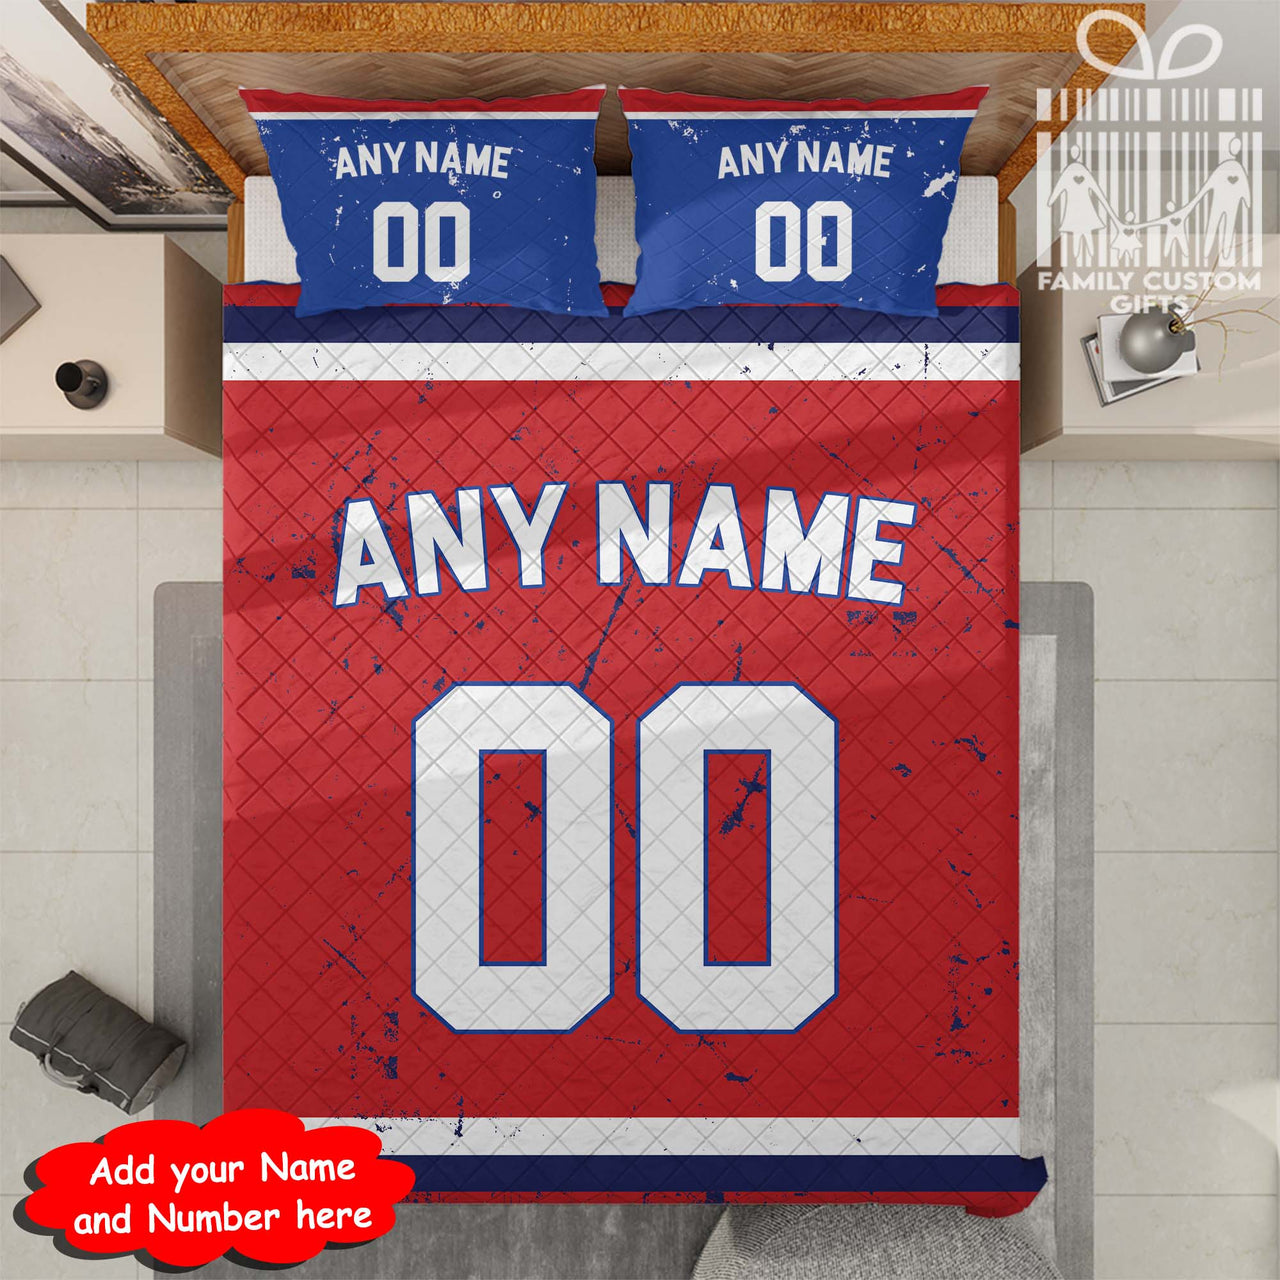 Custom Quilt Sets Montreal Jersey Personalized Ice hockey Premium Quilt Bedding for Men Women